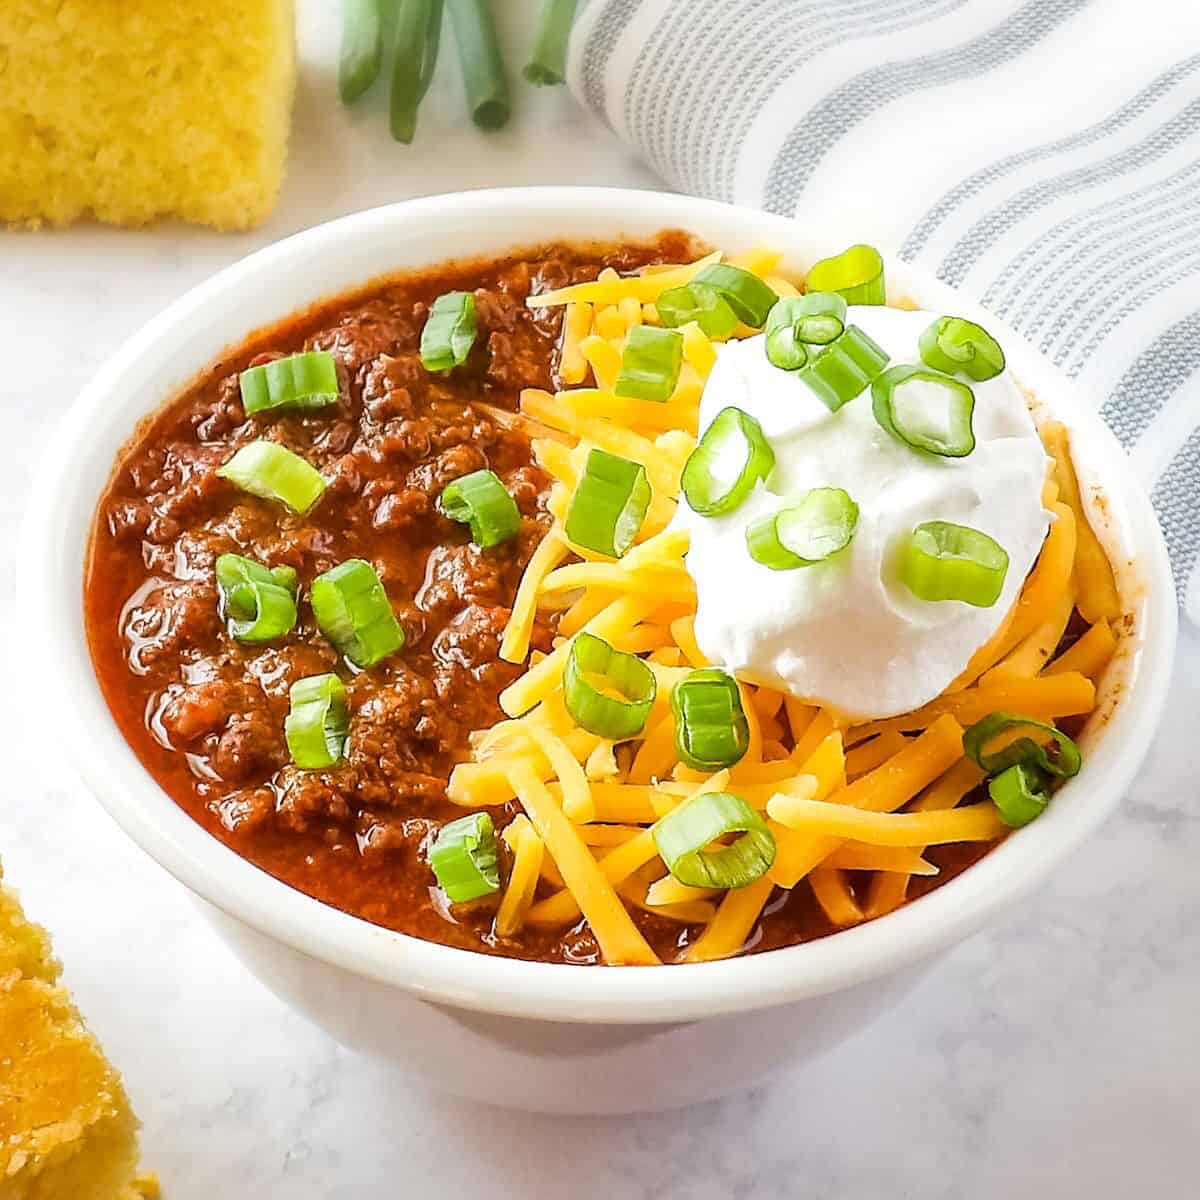 Slow cooker venison chili (deer chili) topped with cheese, sour cream, and green onions in a white bowl.